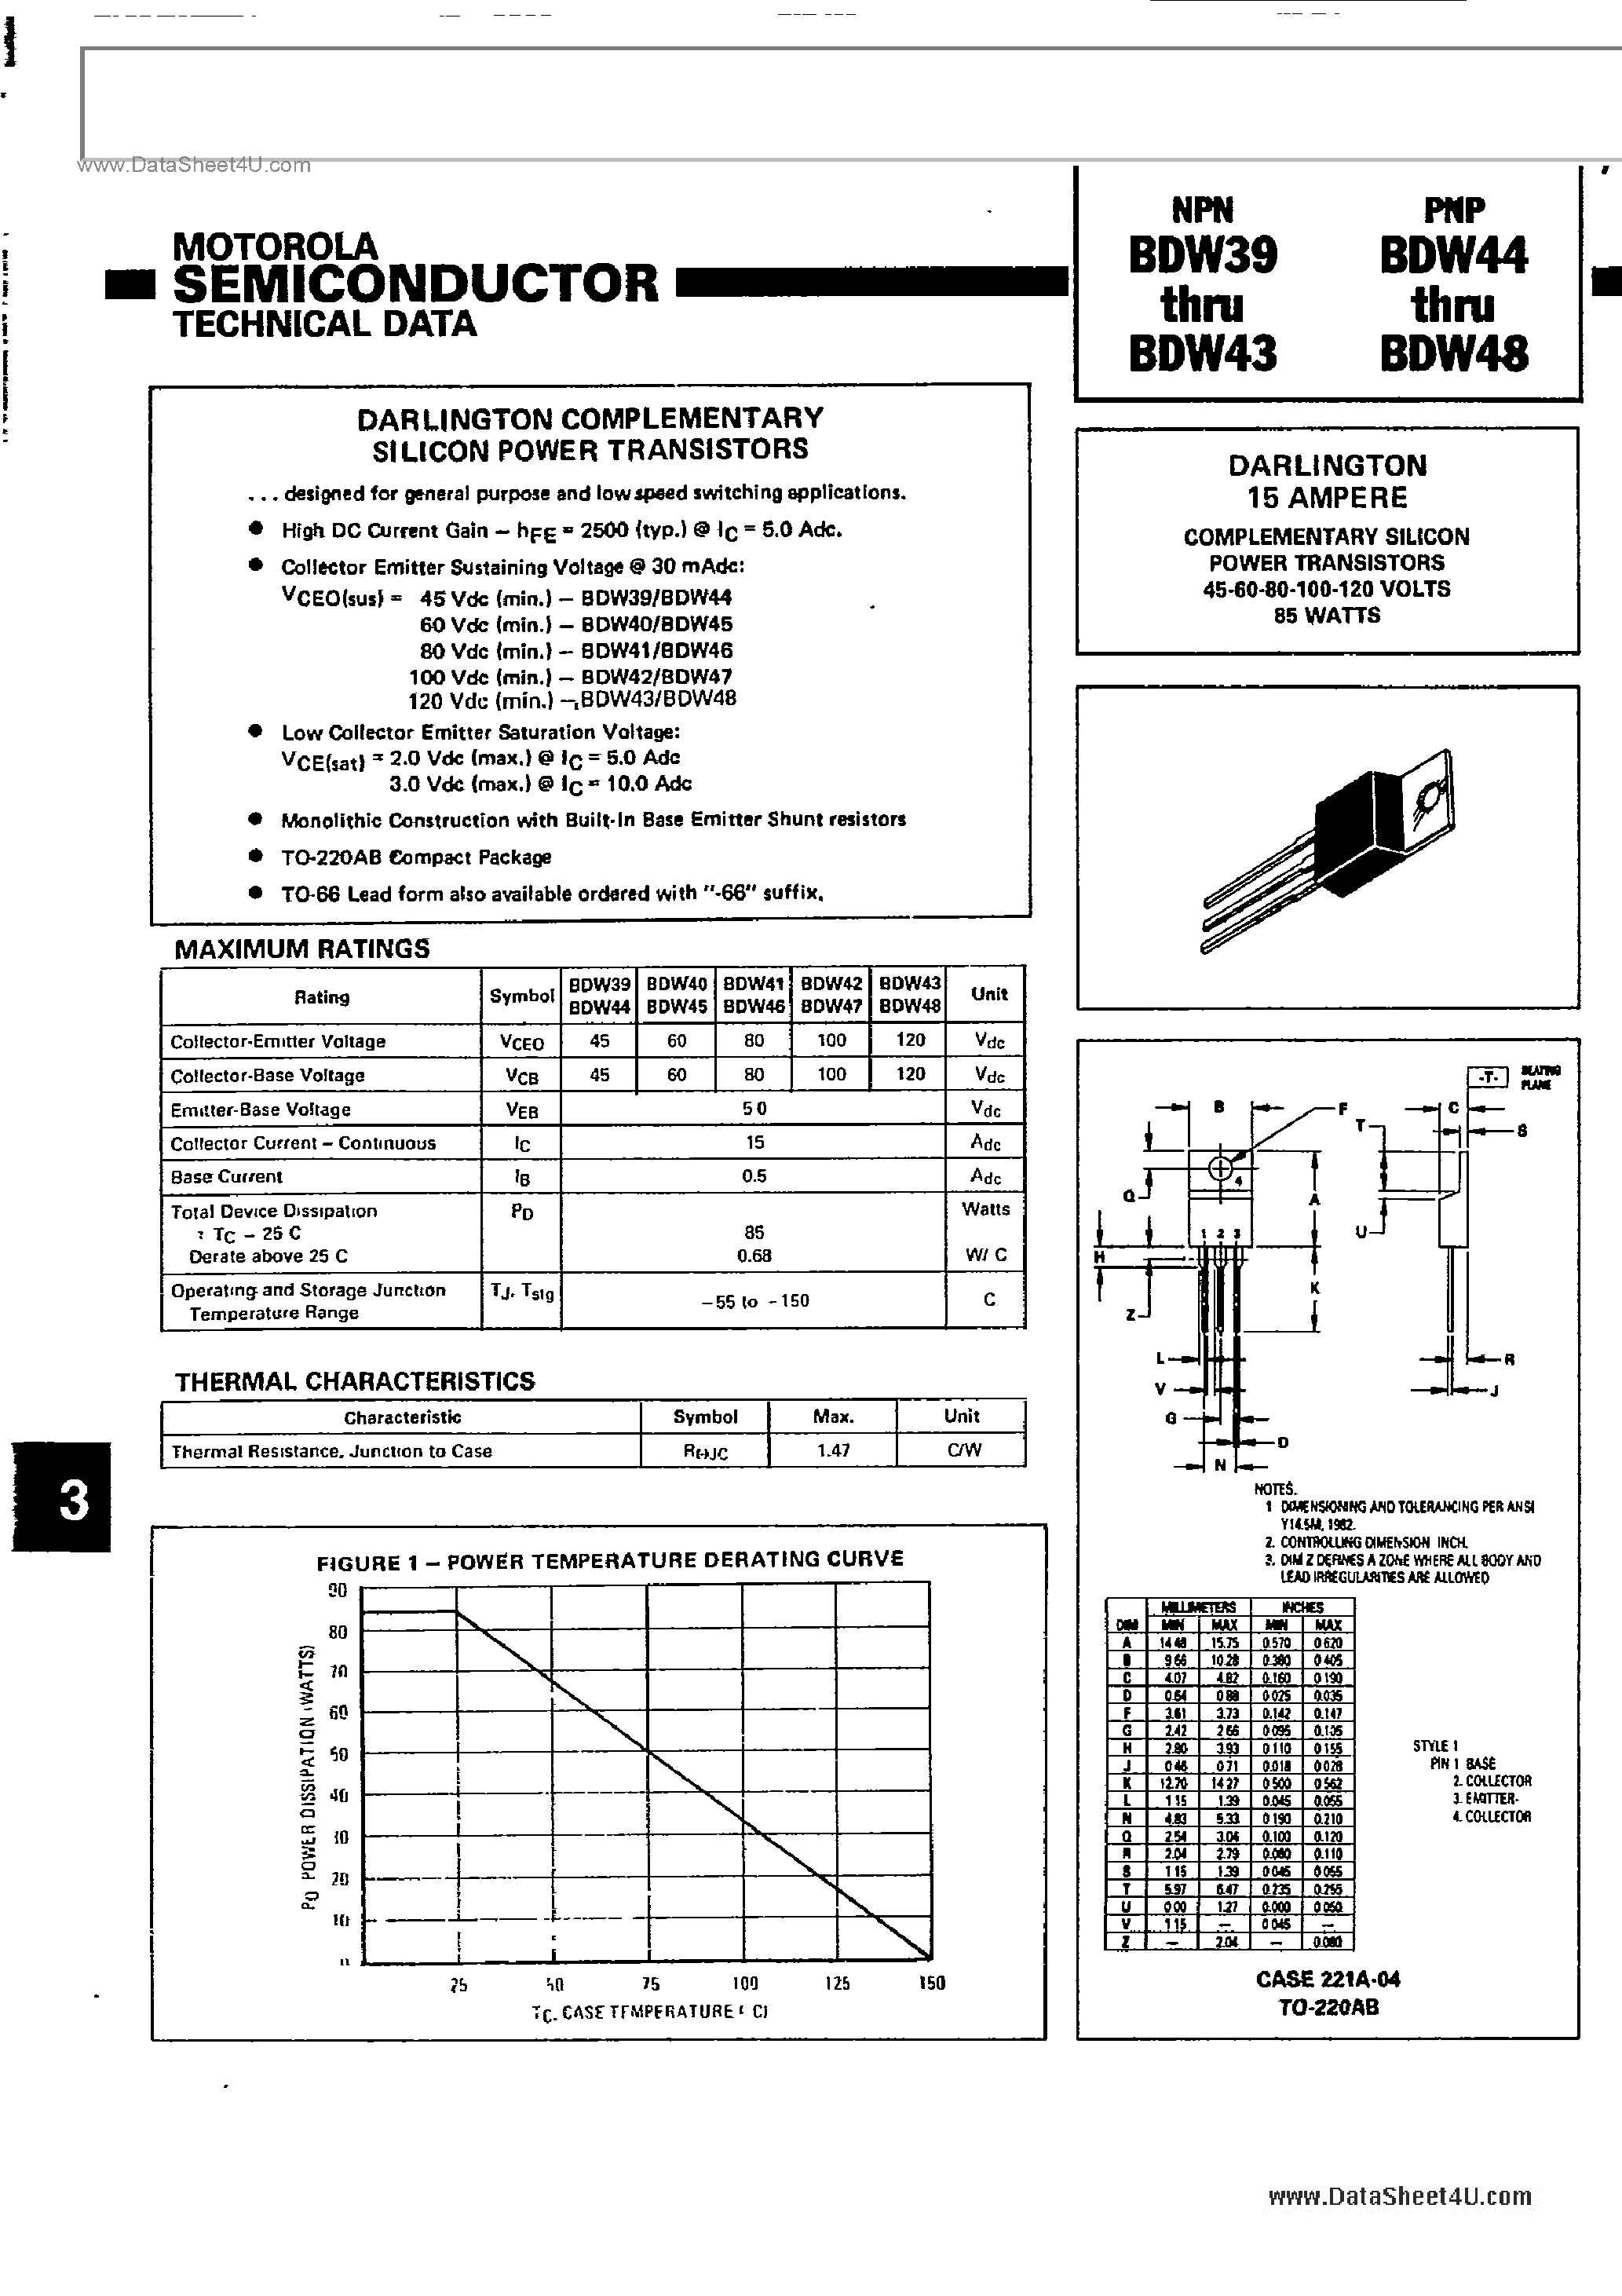 Datasheet BDW39 - (BDW39 - BDW48) DARLINGTON COMPLEMENTARY SILICON POWER TRANSISTORS page 1